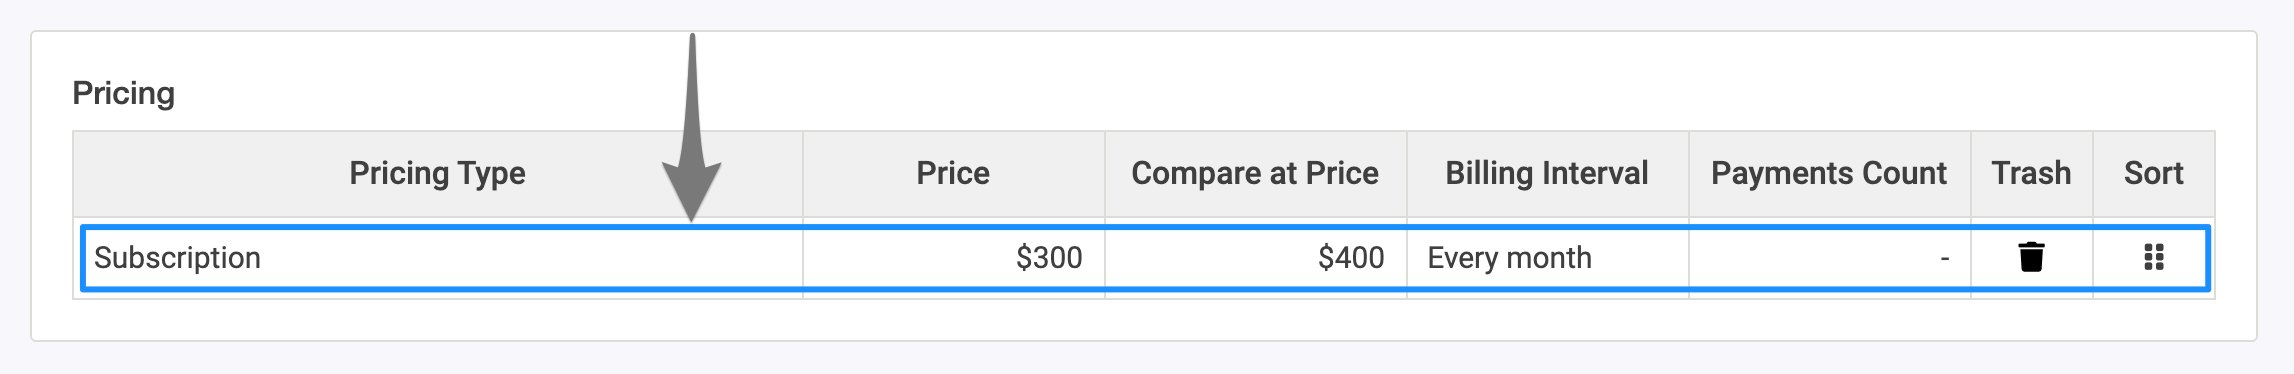 pricing_subscription_row.png